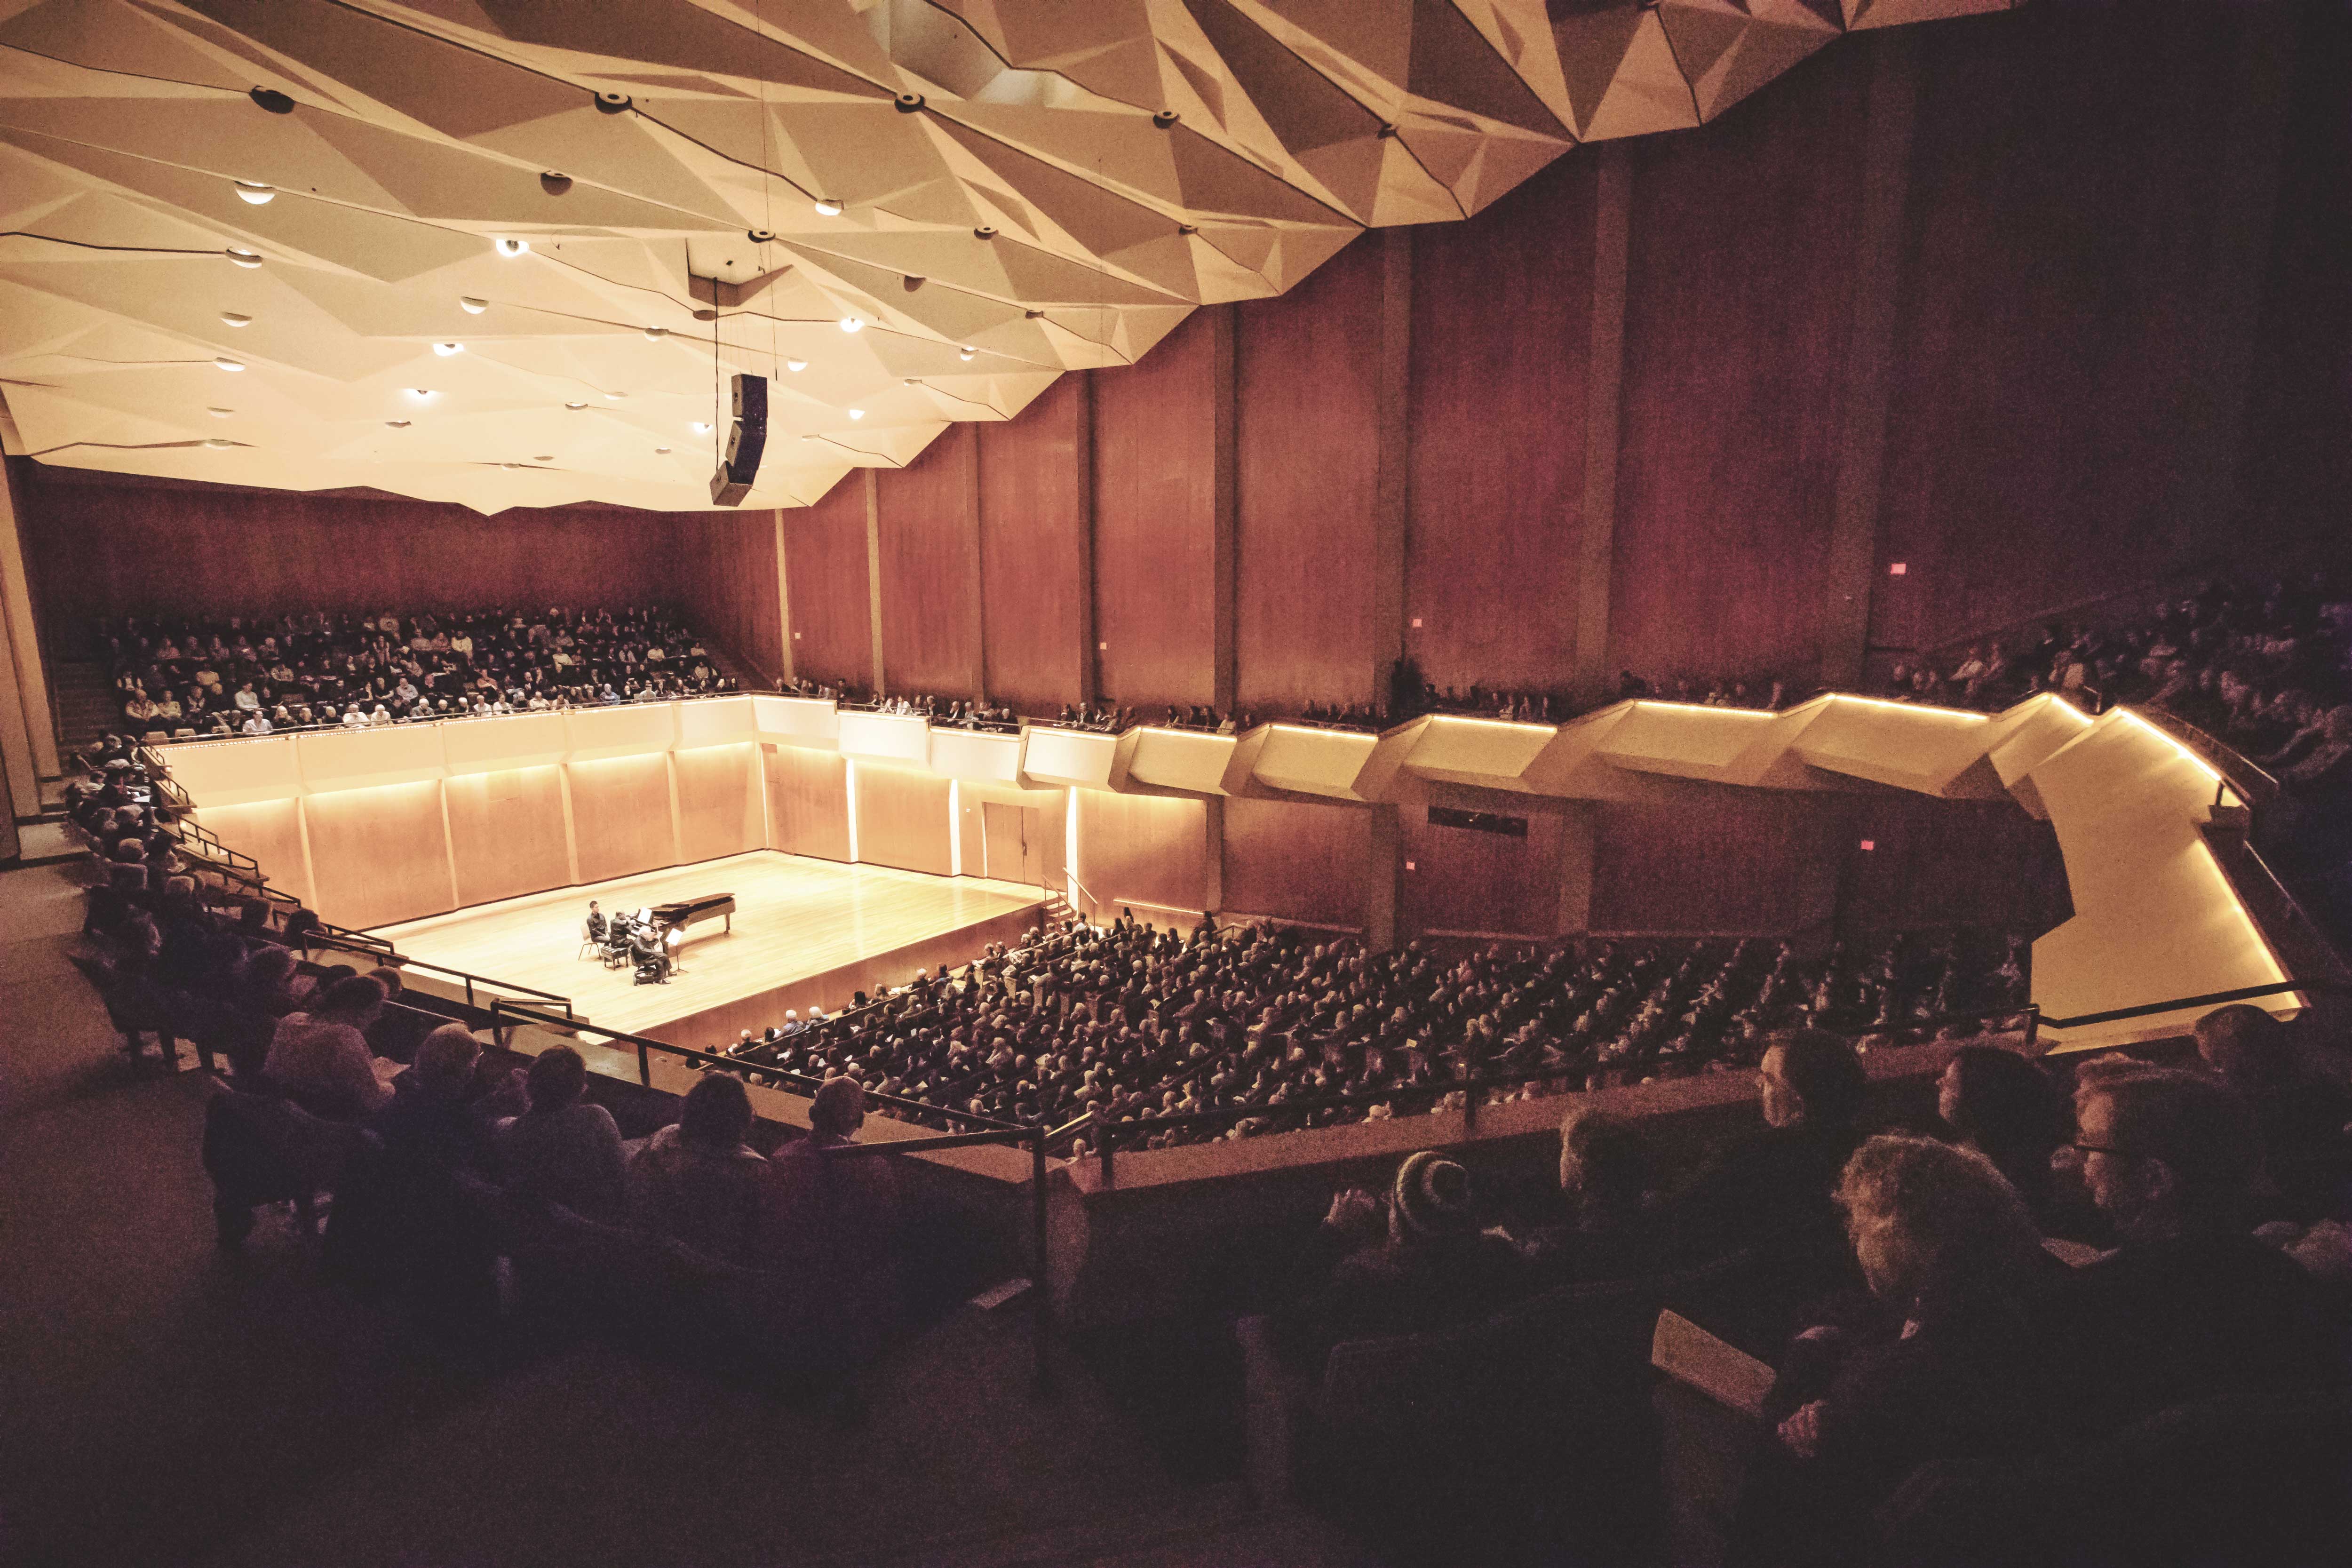 Sold out performance at Krannert